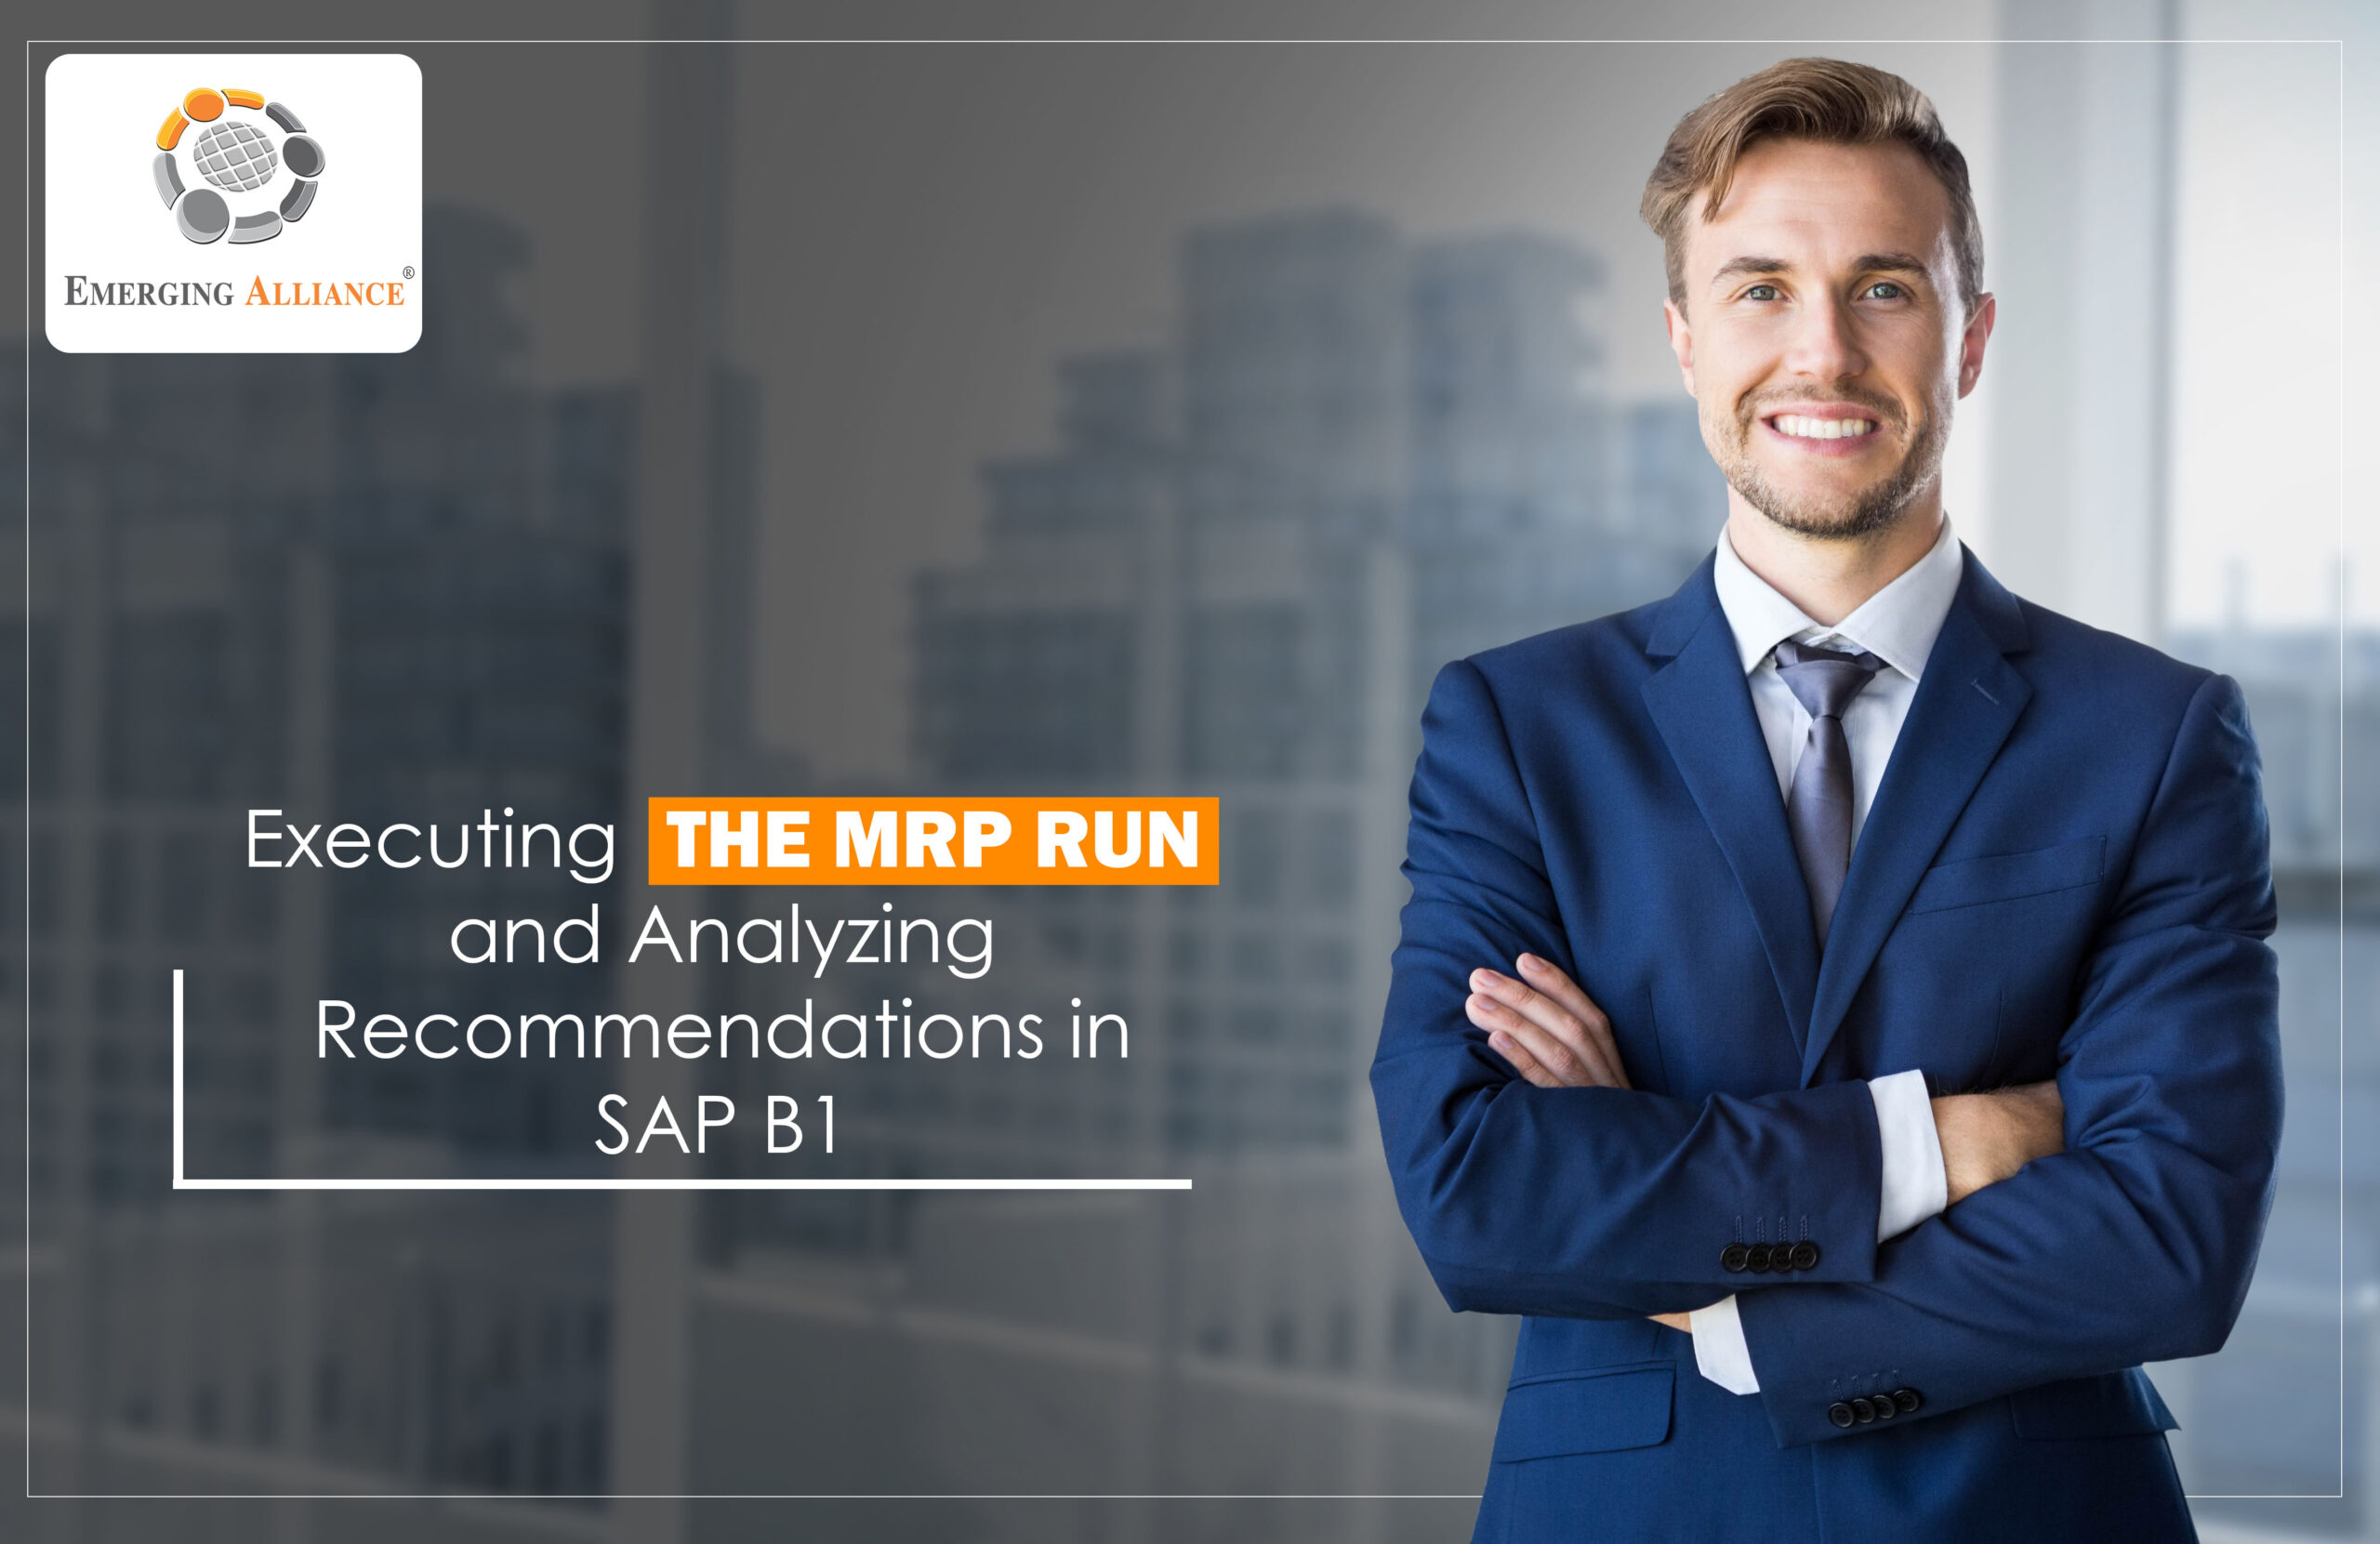 Executing the MRP RUN AND ANALYSIS in SAP Business One